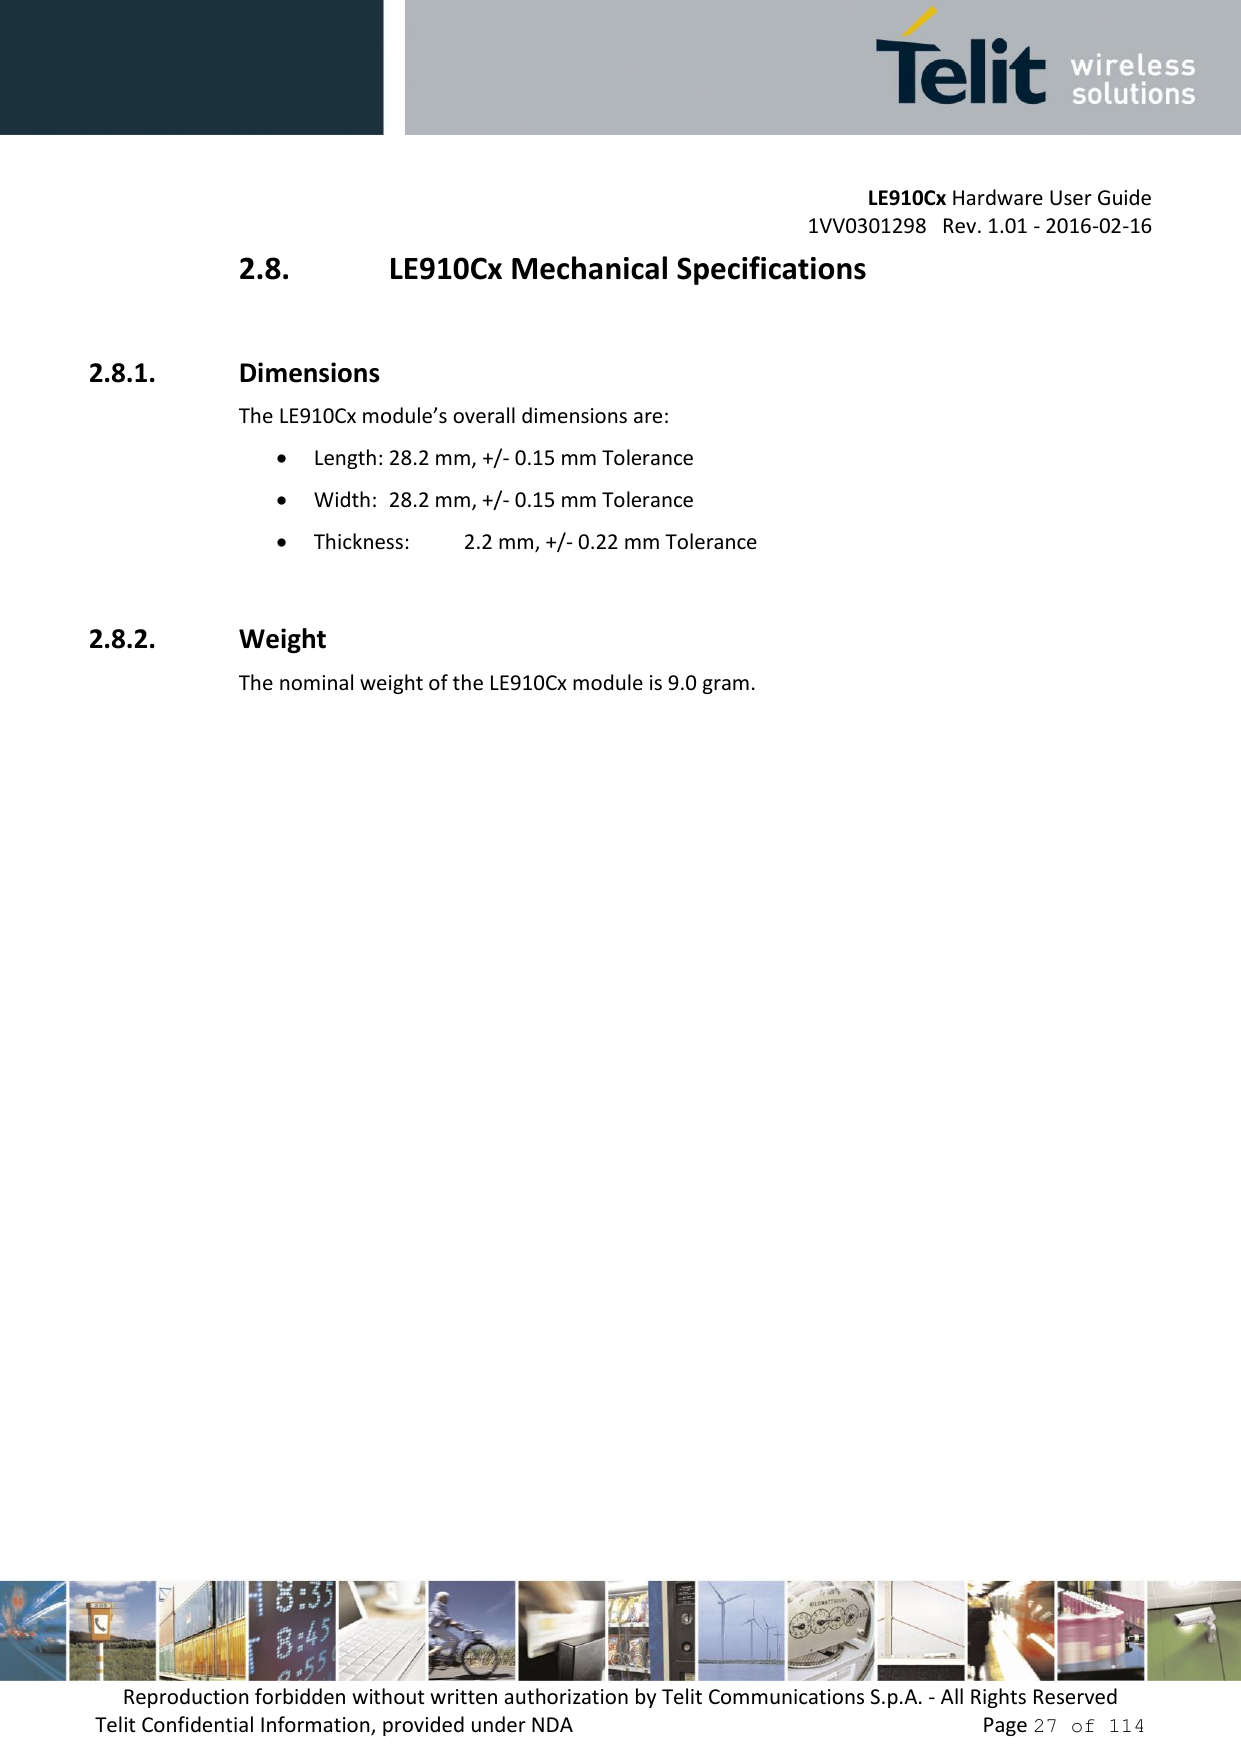         LE910Cx Hardware User Guide     1VV0301298   Rev. 1.01 - 2016-02-16 Reproduction forbidden without written authorization by Telit Communications S.p.A. - All Rights Reserved Telit Confidential Information, provided under NDA                 Page 27 of 114 2.8. LE910Cx Mechanical Specifications  2.8.1. Dimensions The LE910Cx module’s overall dimensions are:   Length: 28.2 mm, +/- 0.15 mm Tolerance  Width:  28.2 mm, +/- 0.15 mm Tolerance  Thickness:   2.2 mm, +/- 0.22 mm Tolerance  2.8.2. Weight The nominal weight of the LE910Cx module is 9.0 gram. 